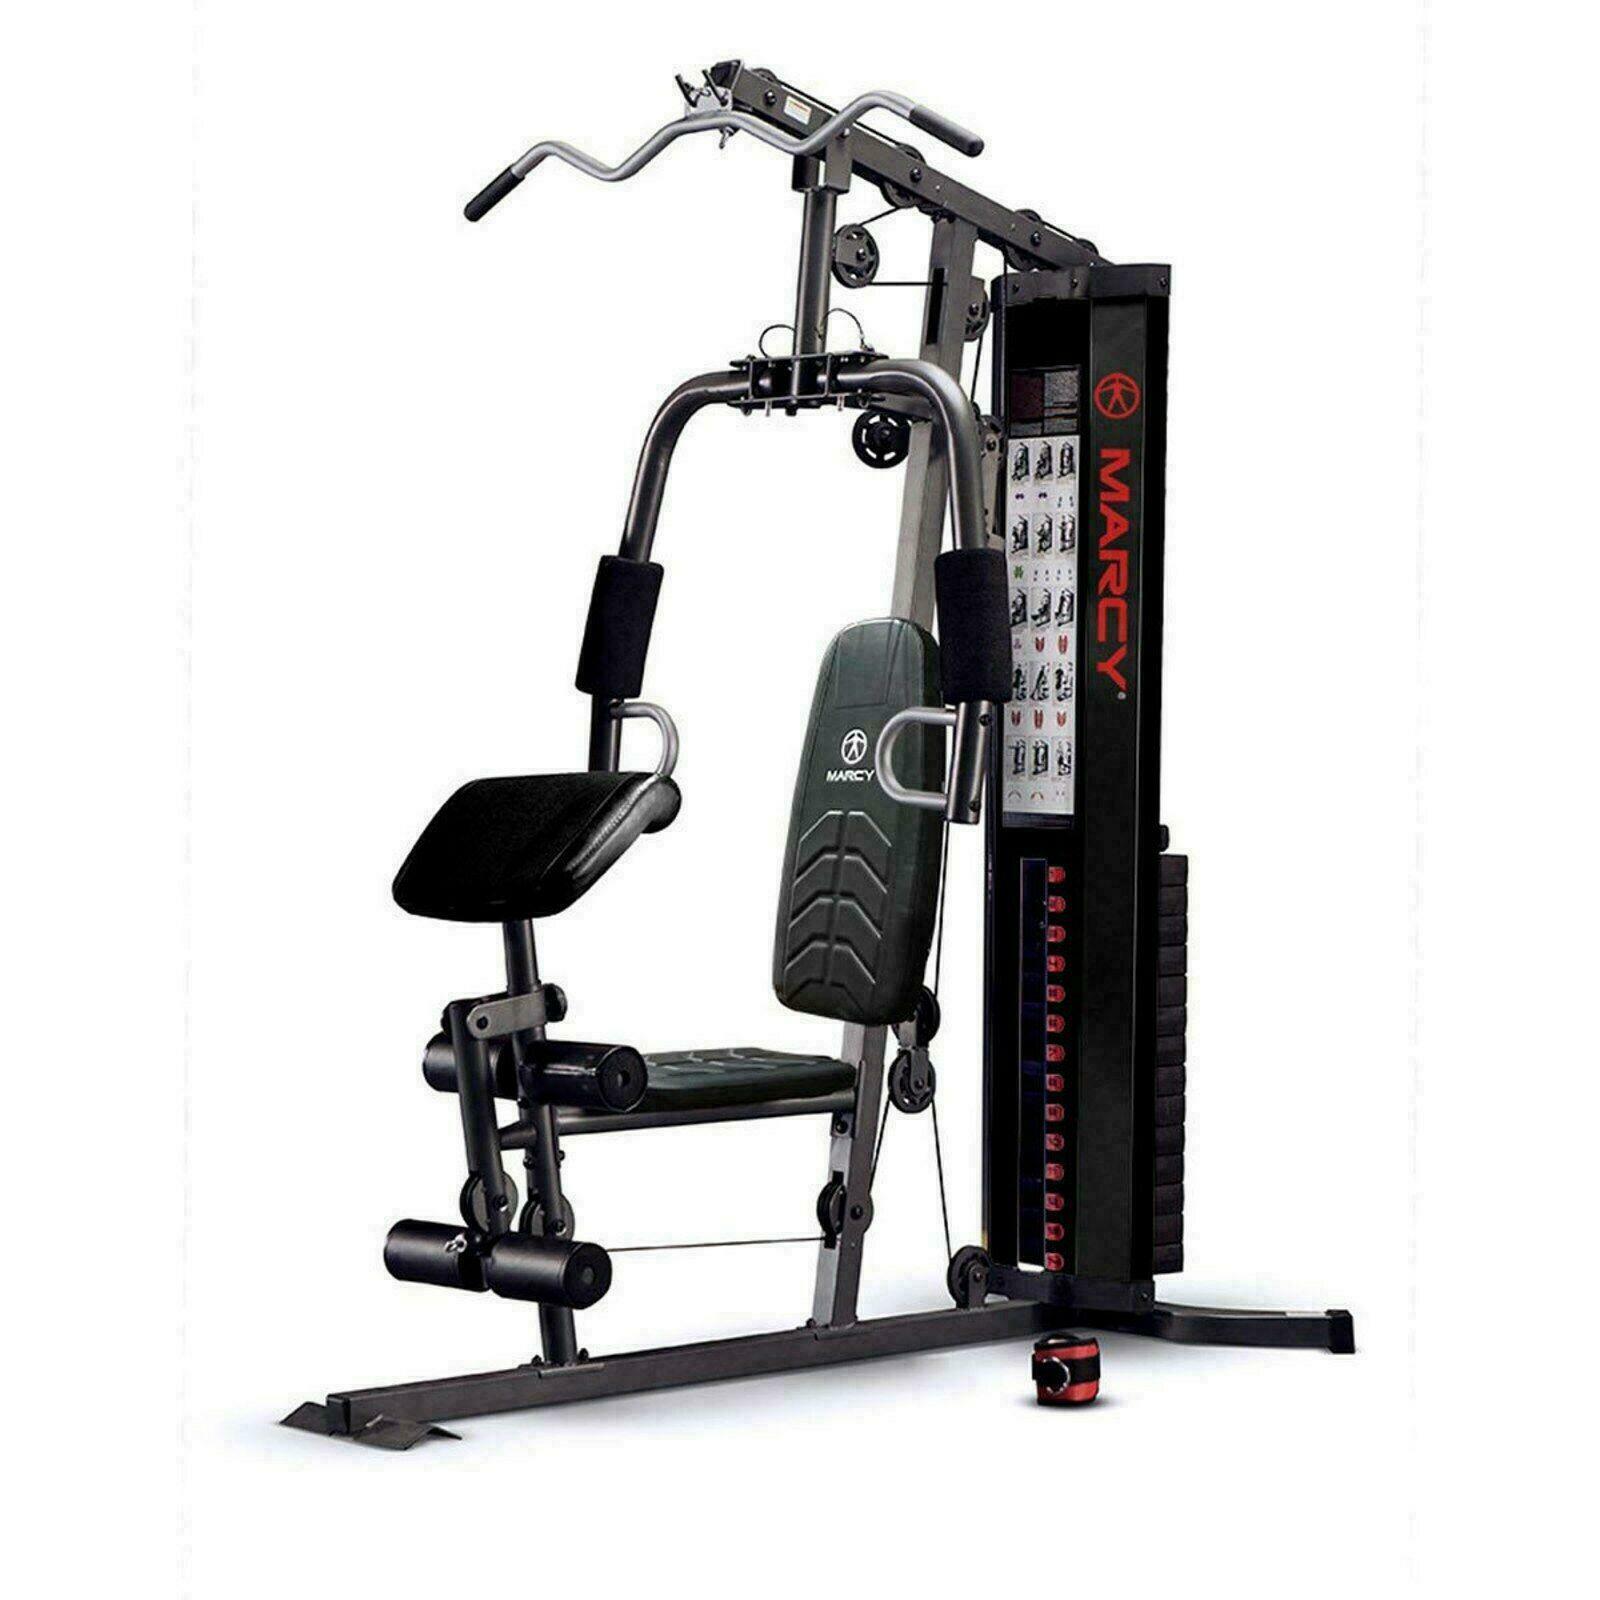 Marcy Multi Home Gym System Stack Body Workout Machine 68kg